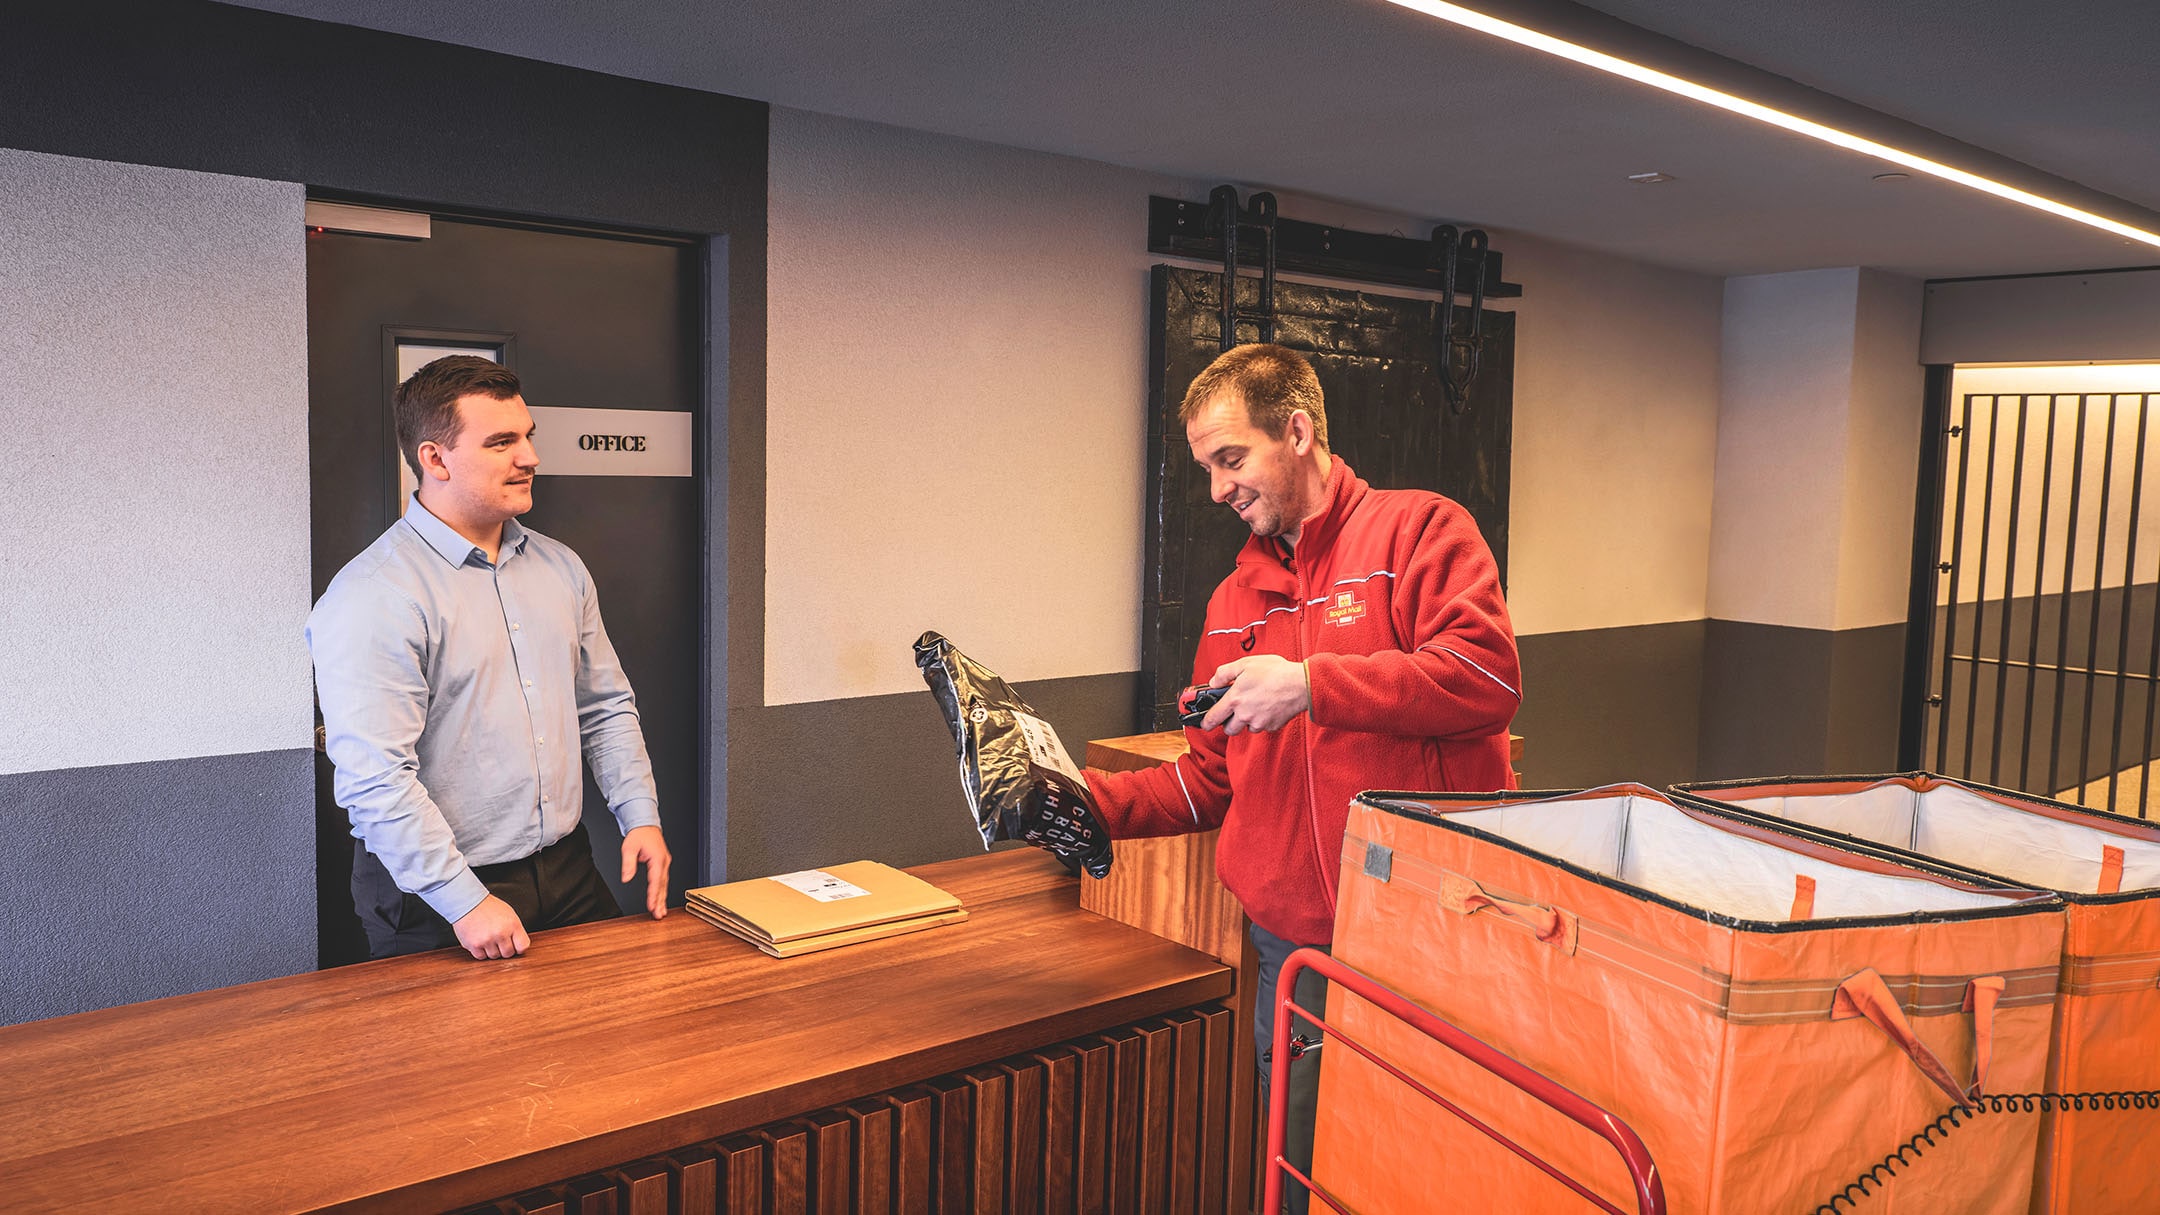 Delivery man handing over a package to a man standing behind a reception desk